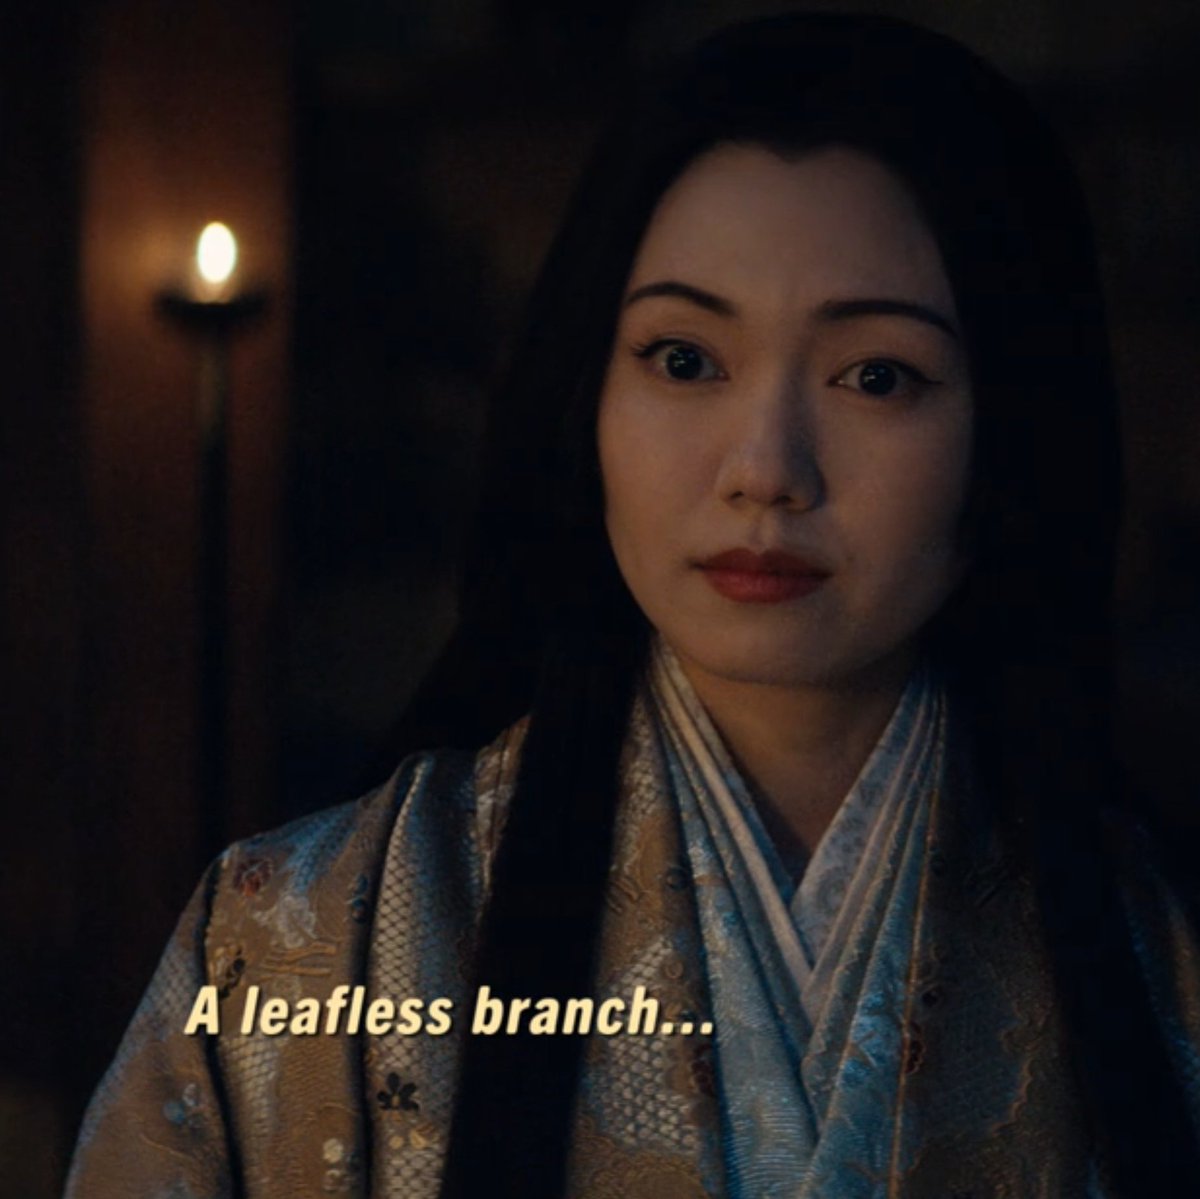 While the snow remains Veiled in the haze of cold evening A leafless branch... This hits hard knowing Mariko was exiled somewhere cold and the last part basically makes it a diss to Ochiba since her name means 'fallen leaves.' And Mariko freestyled it 🥶 #ShogunFX #Shogun